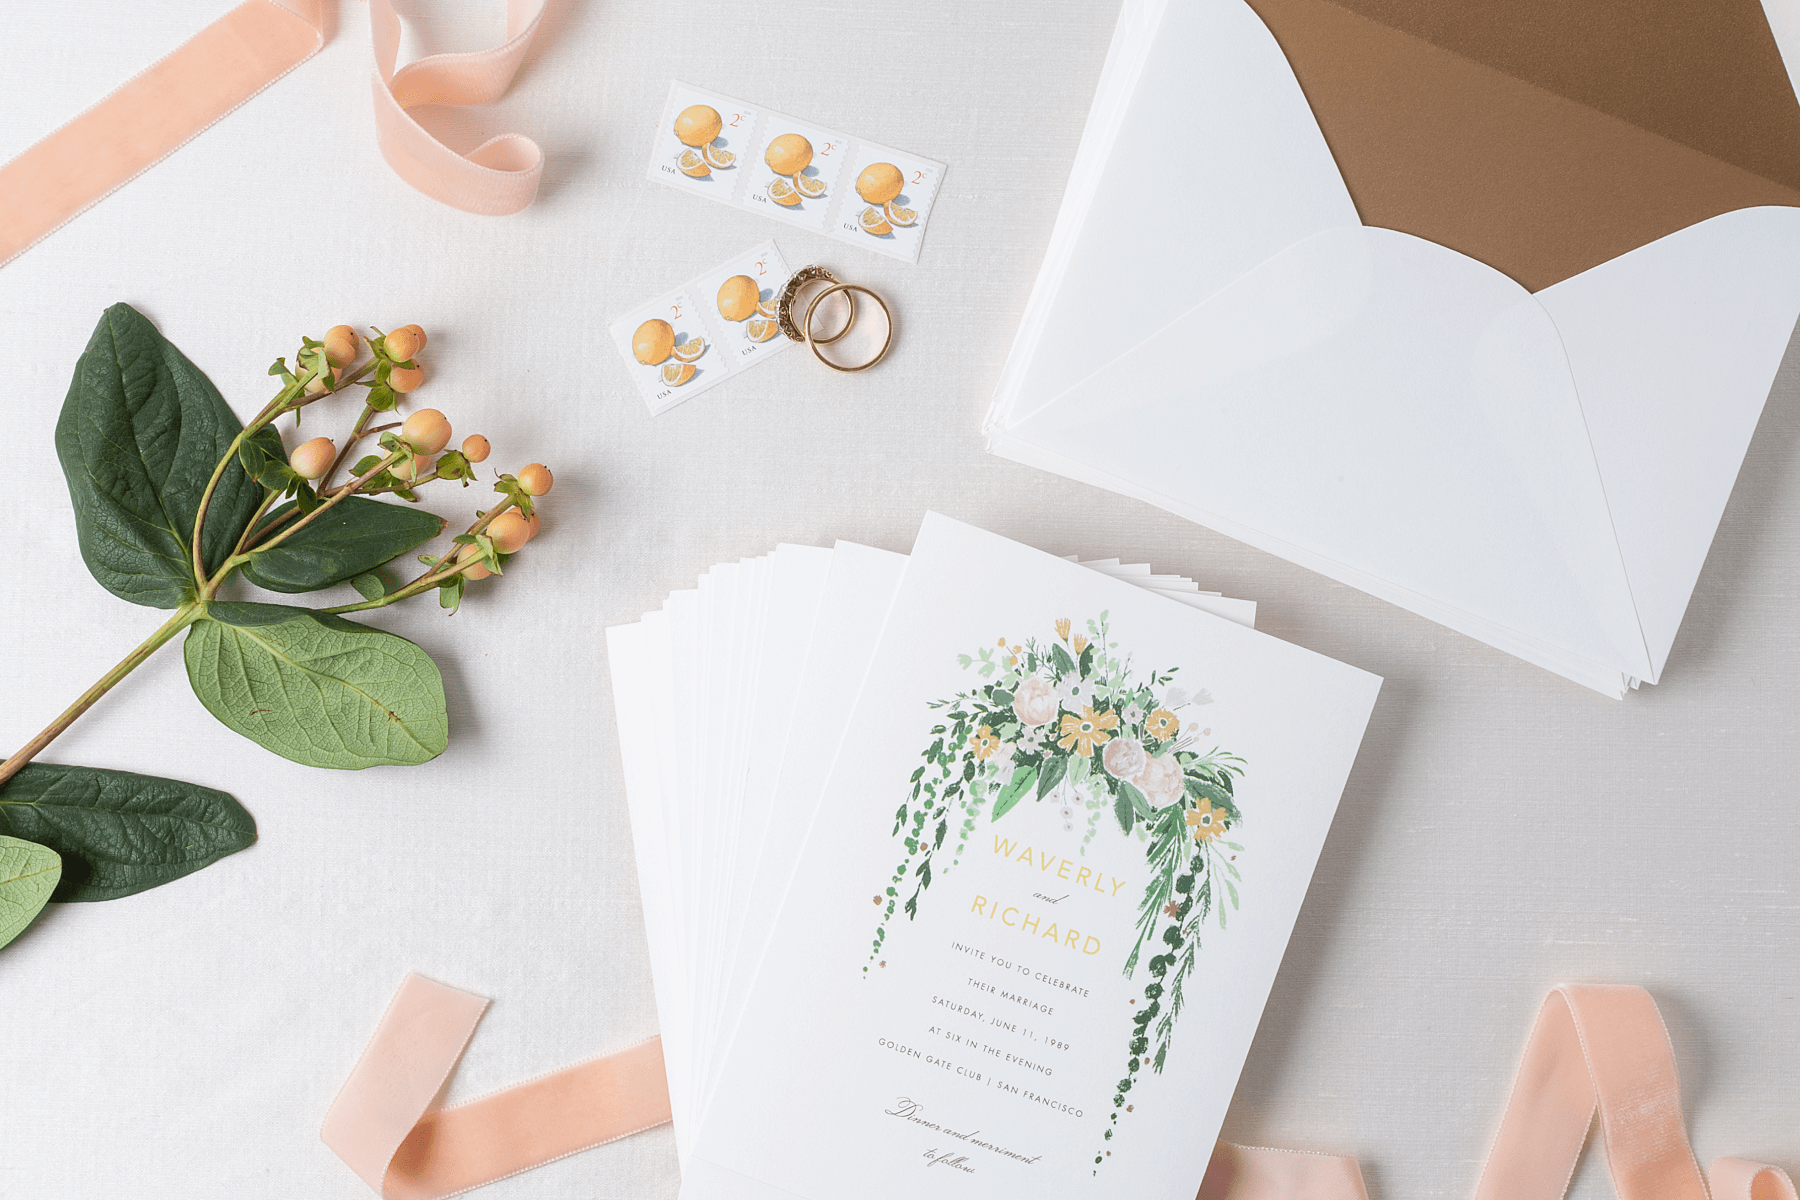 A stack of printed wedding invitations featuring a watercolor floral illustration are surrounded by pink velvet ribbon, lemon stamps, and a pair of wedding rings.